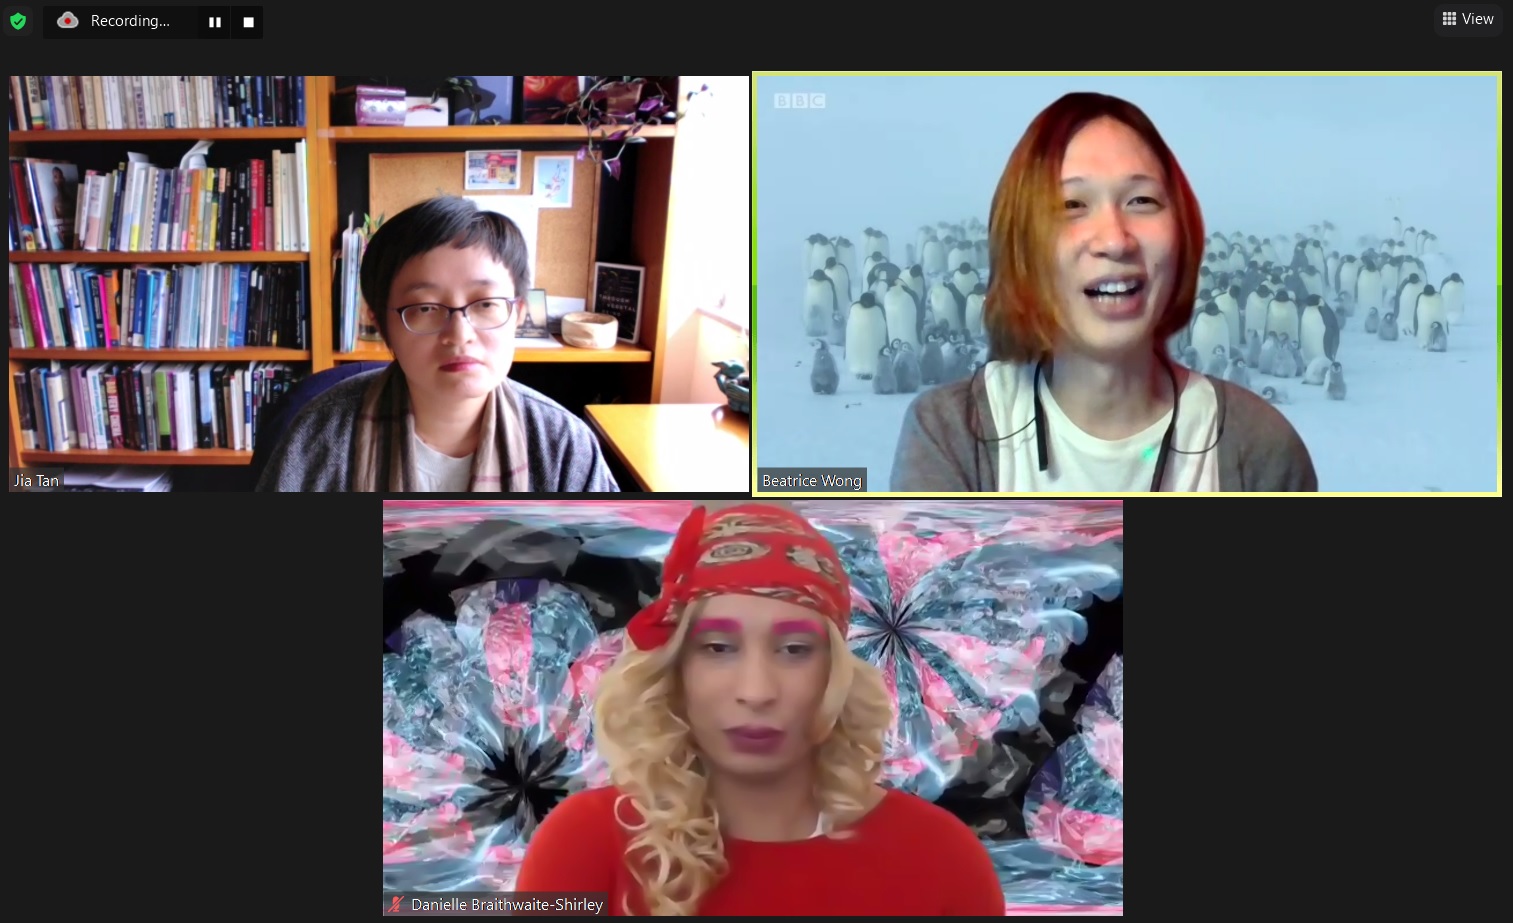 3 frames from Zoom webinar including speakers Jia Tan, Beatrice Wong and Danielle Braithwaite-Shirley